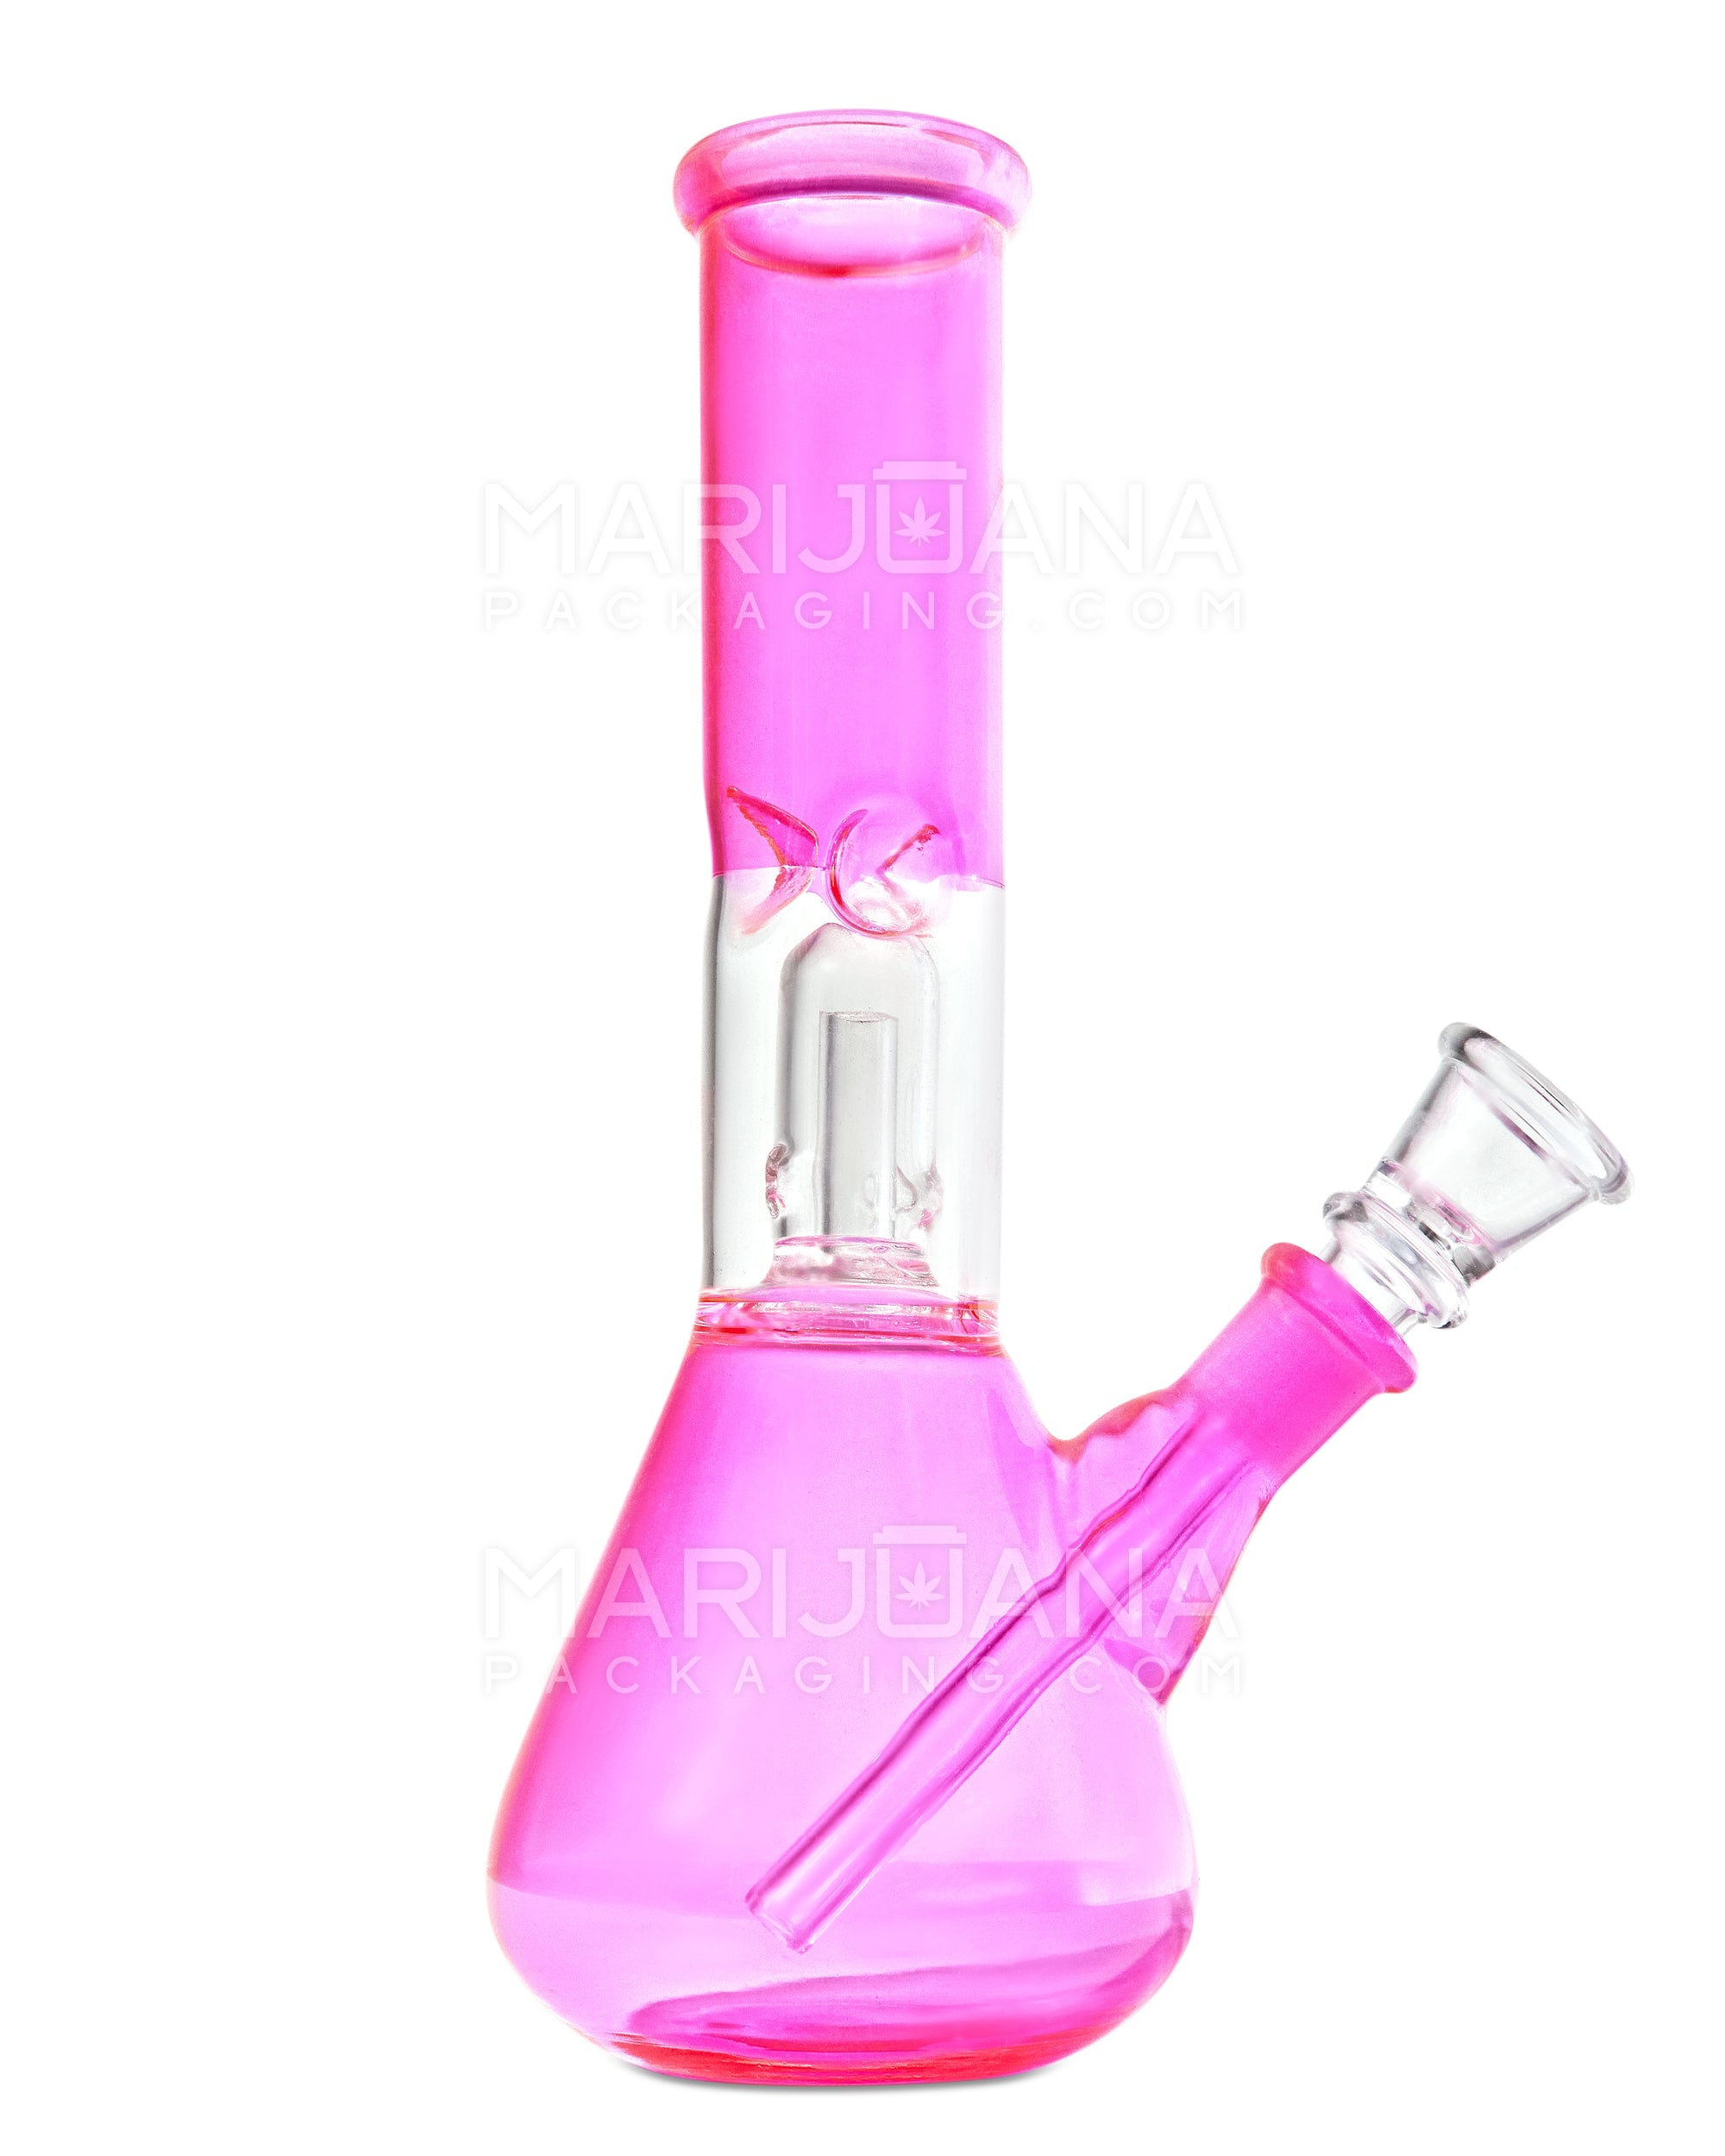 Straight Neck Dome Perc Glass Egg Water Pipe w/ Ice Catcher | 7.5in Tall - 14mm Bowl - Assorted - 6